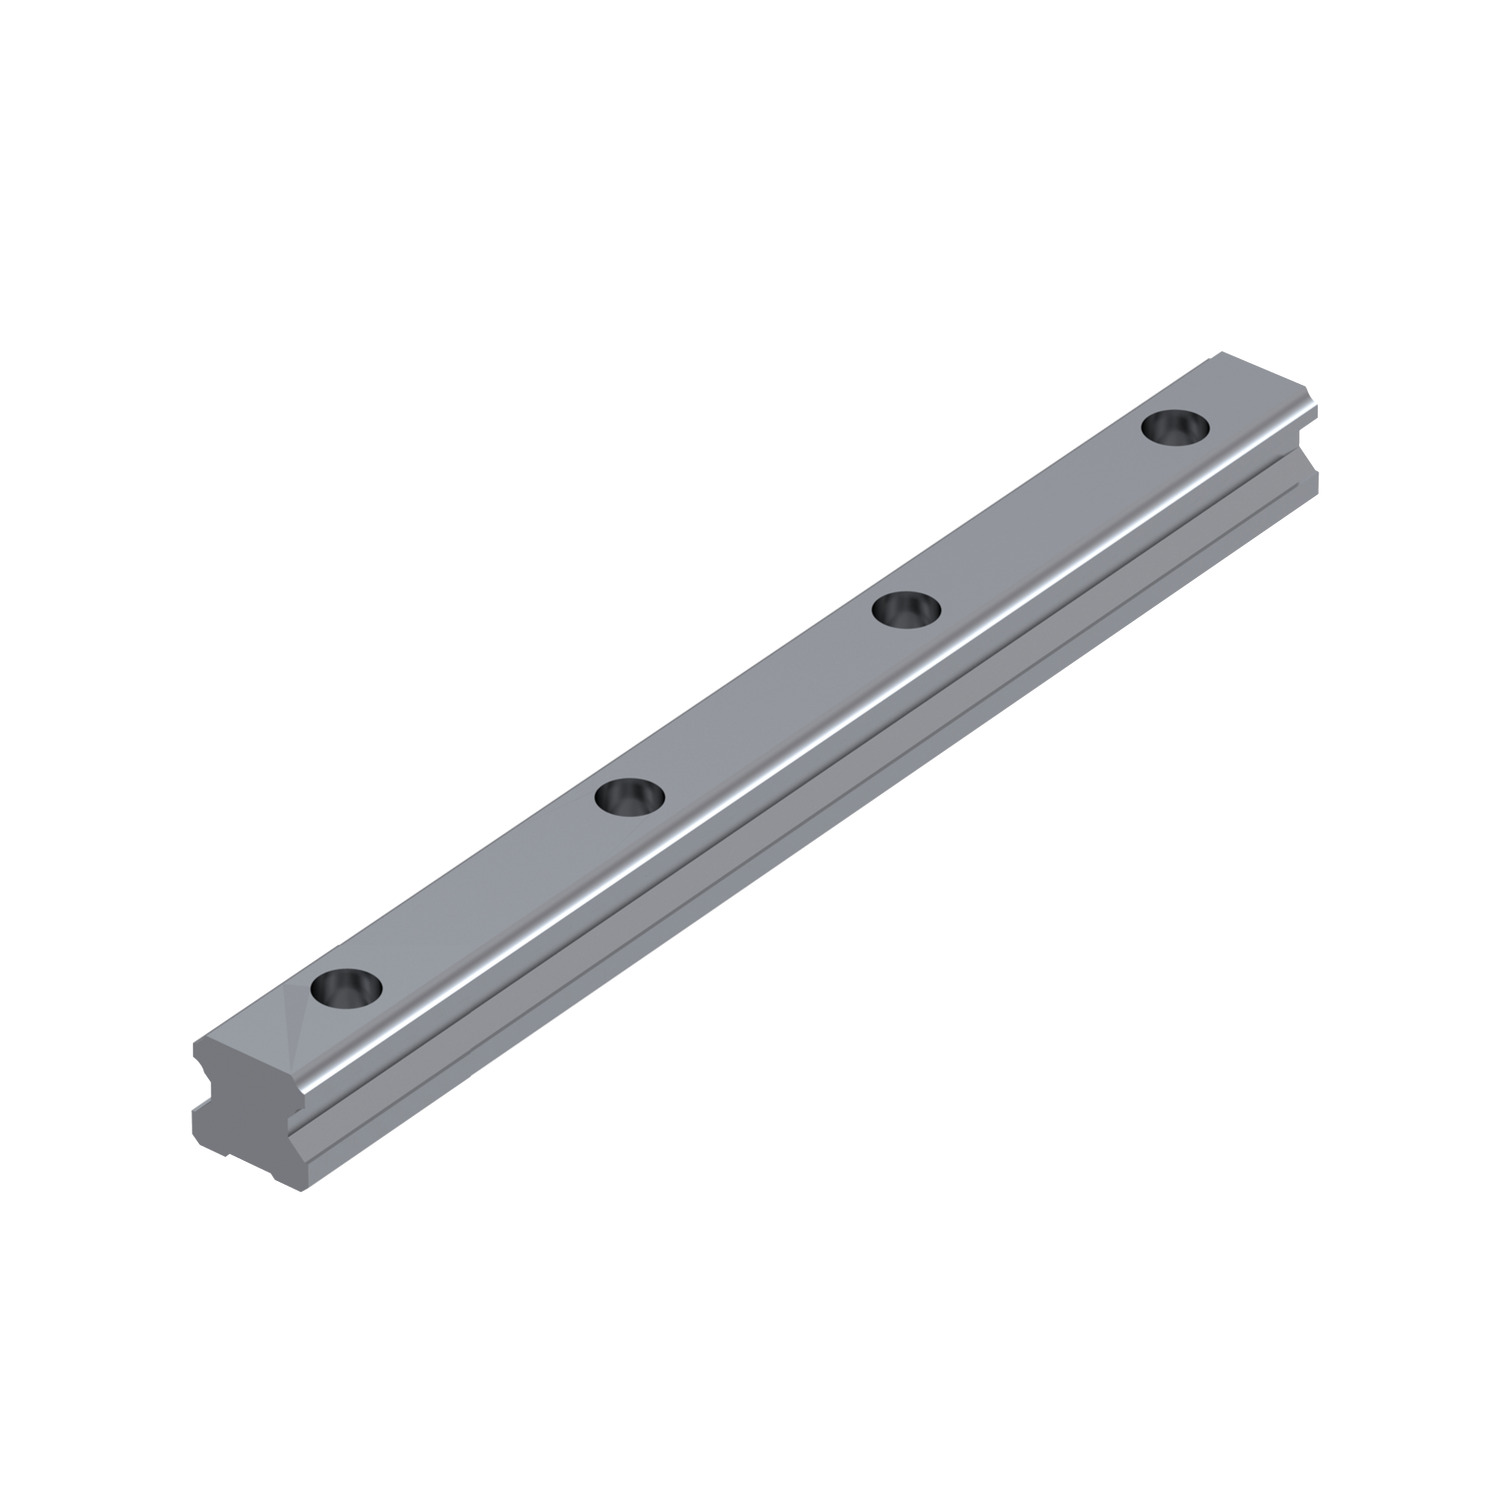 L1016.15-0220 Linear guide rail 15mm 220 Hardened and ground steel. EC:20162481 WG:05063055288620